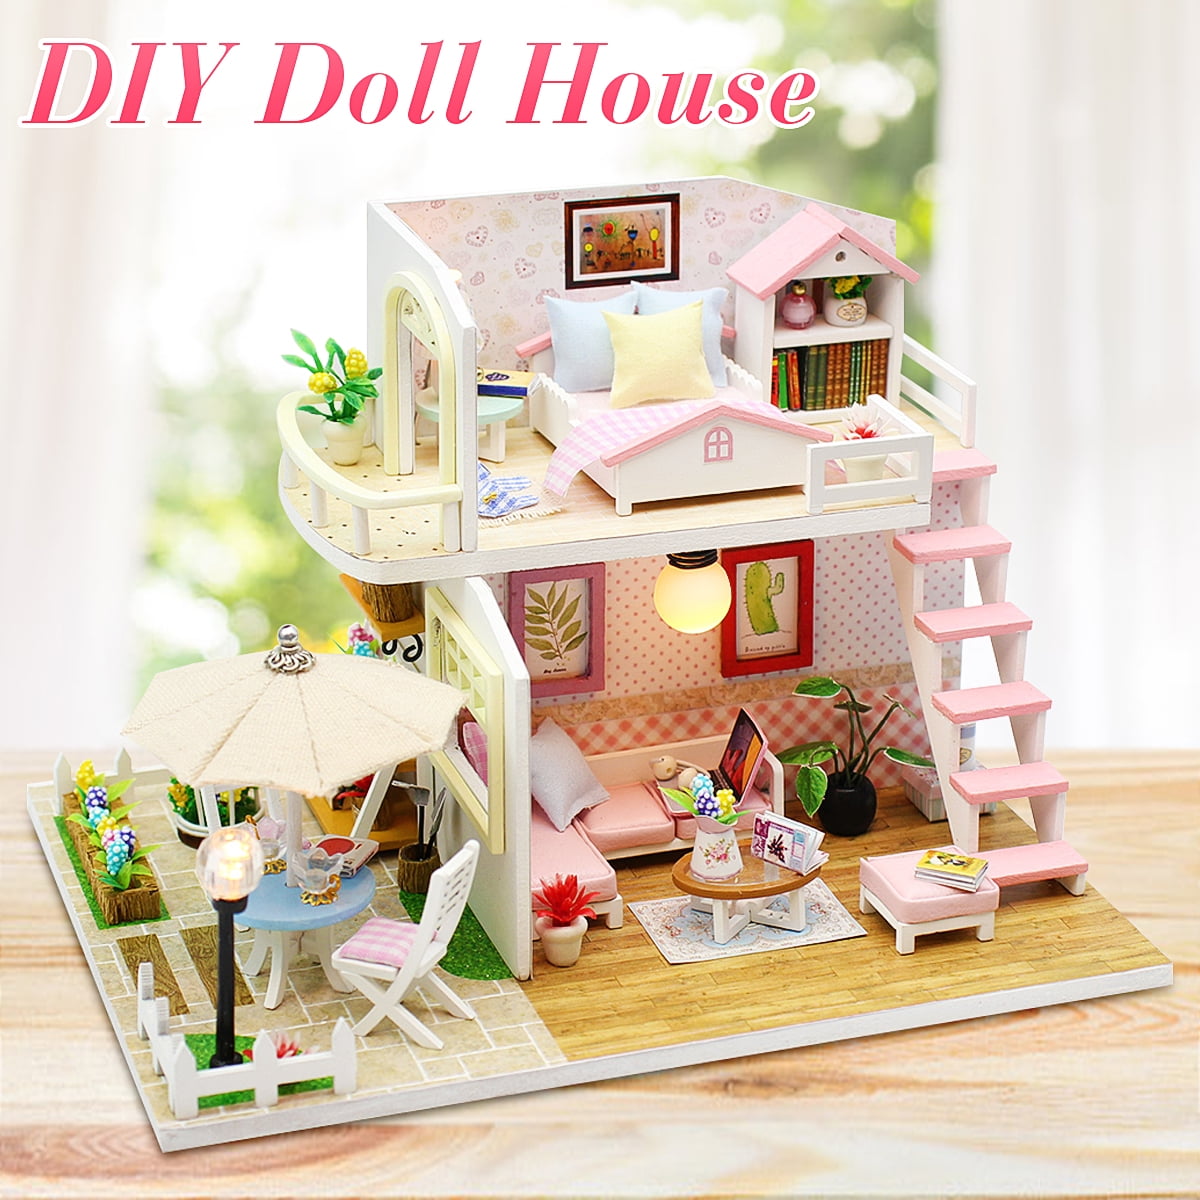 Details about   Miniature Dollhouse Kit To Build Set With Furniture Miniature Wooden DIY Gift 